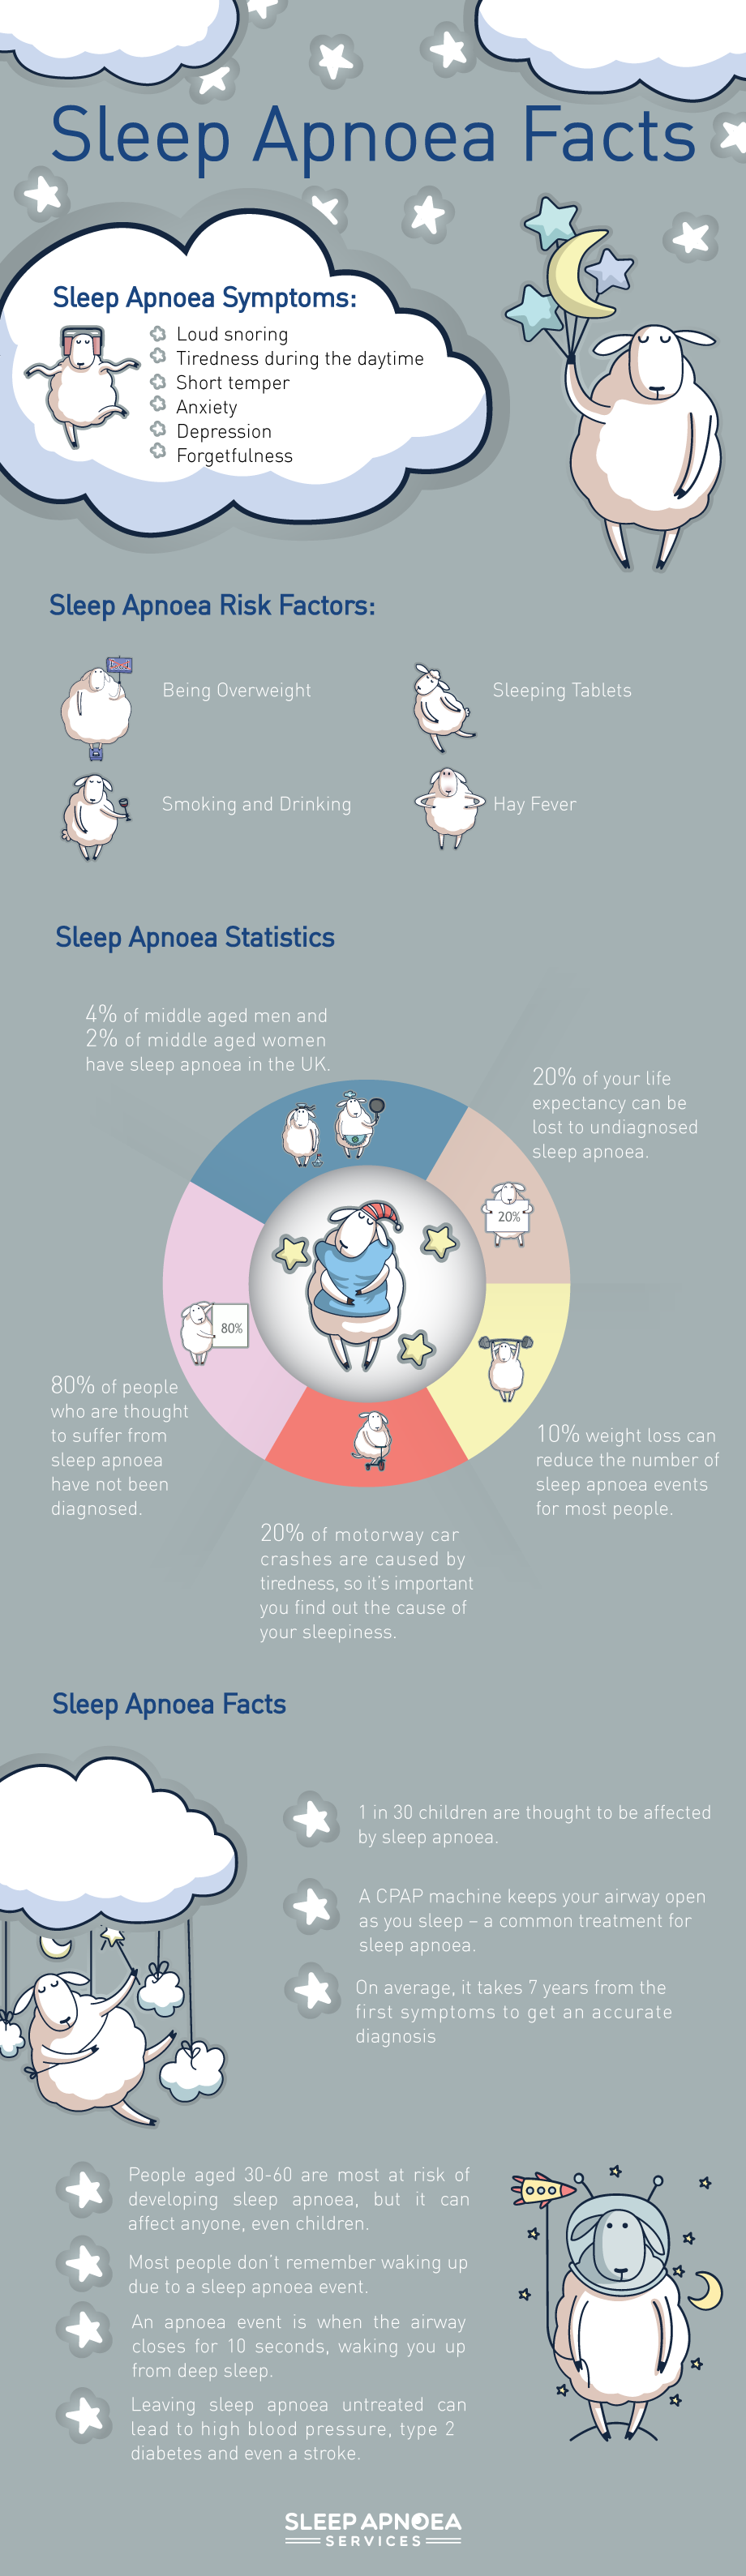 Learn More About Sleep Apnoea and the People it Affects